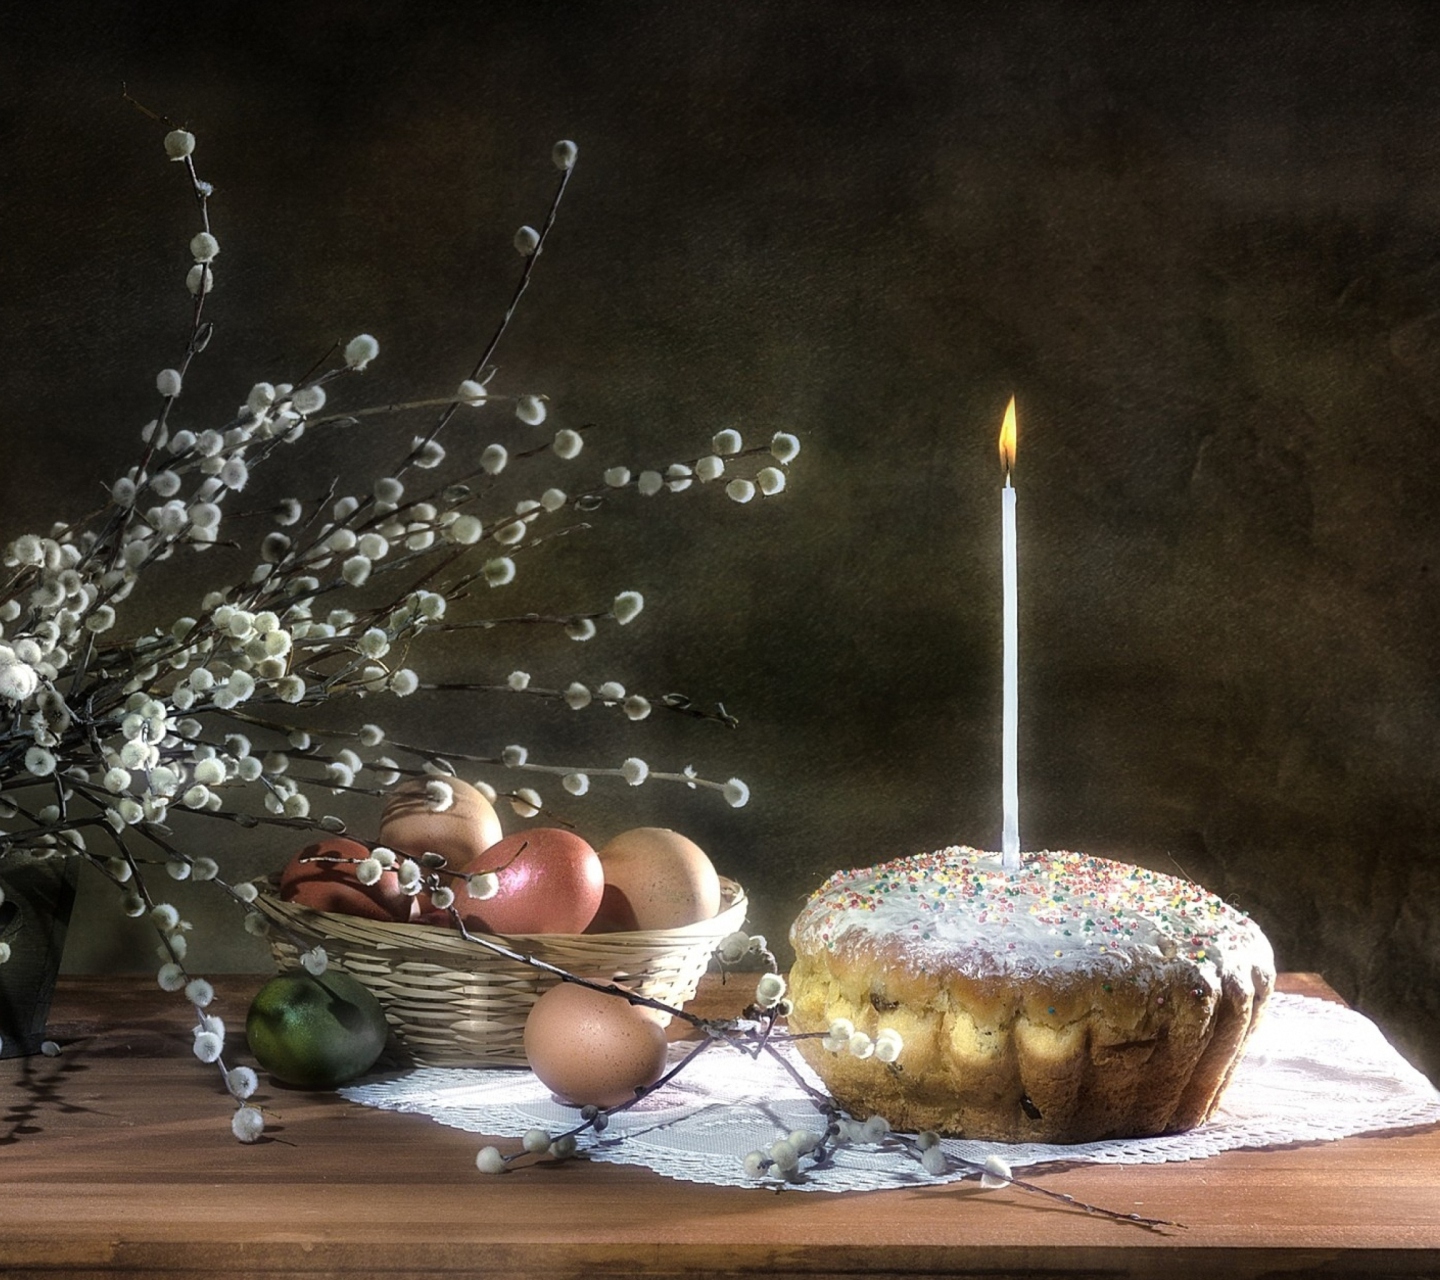 Easter Cake With Candle wallpaper 1440x1280